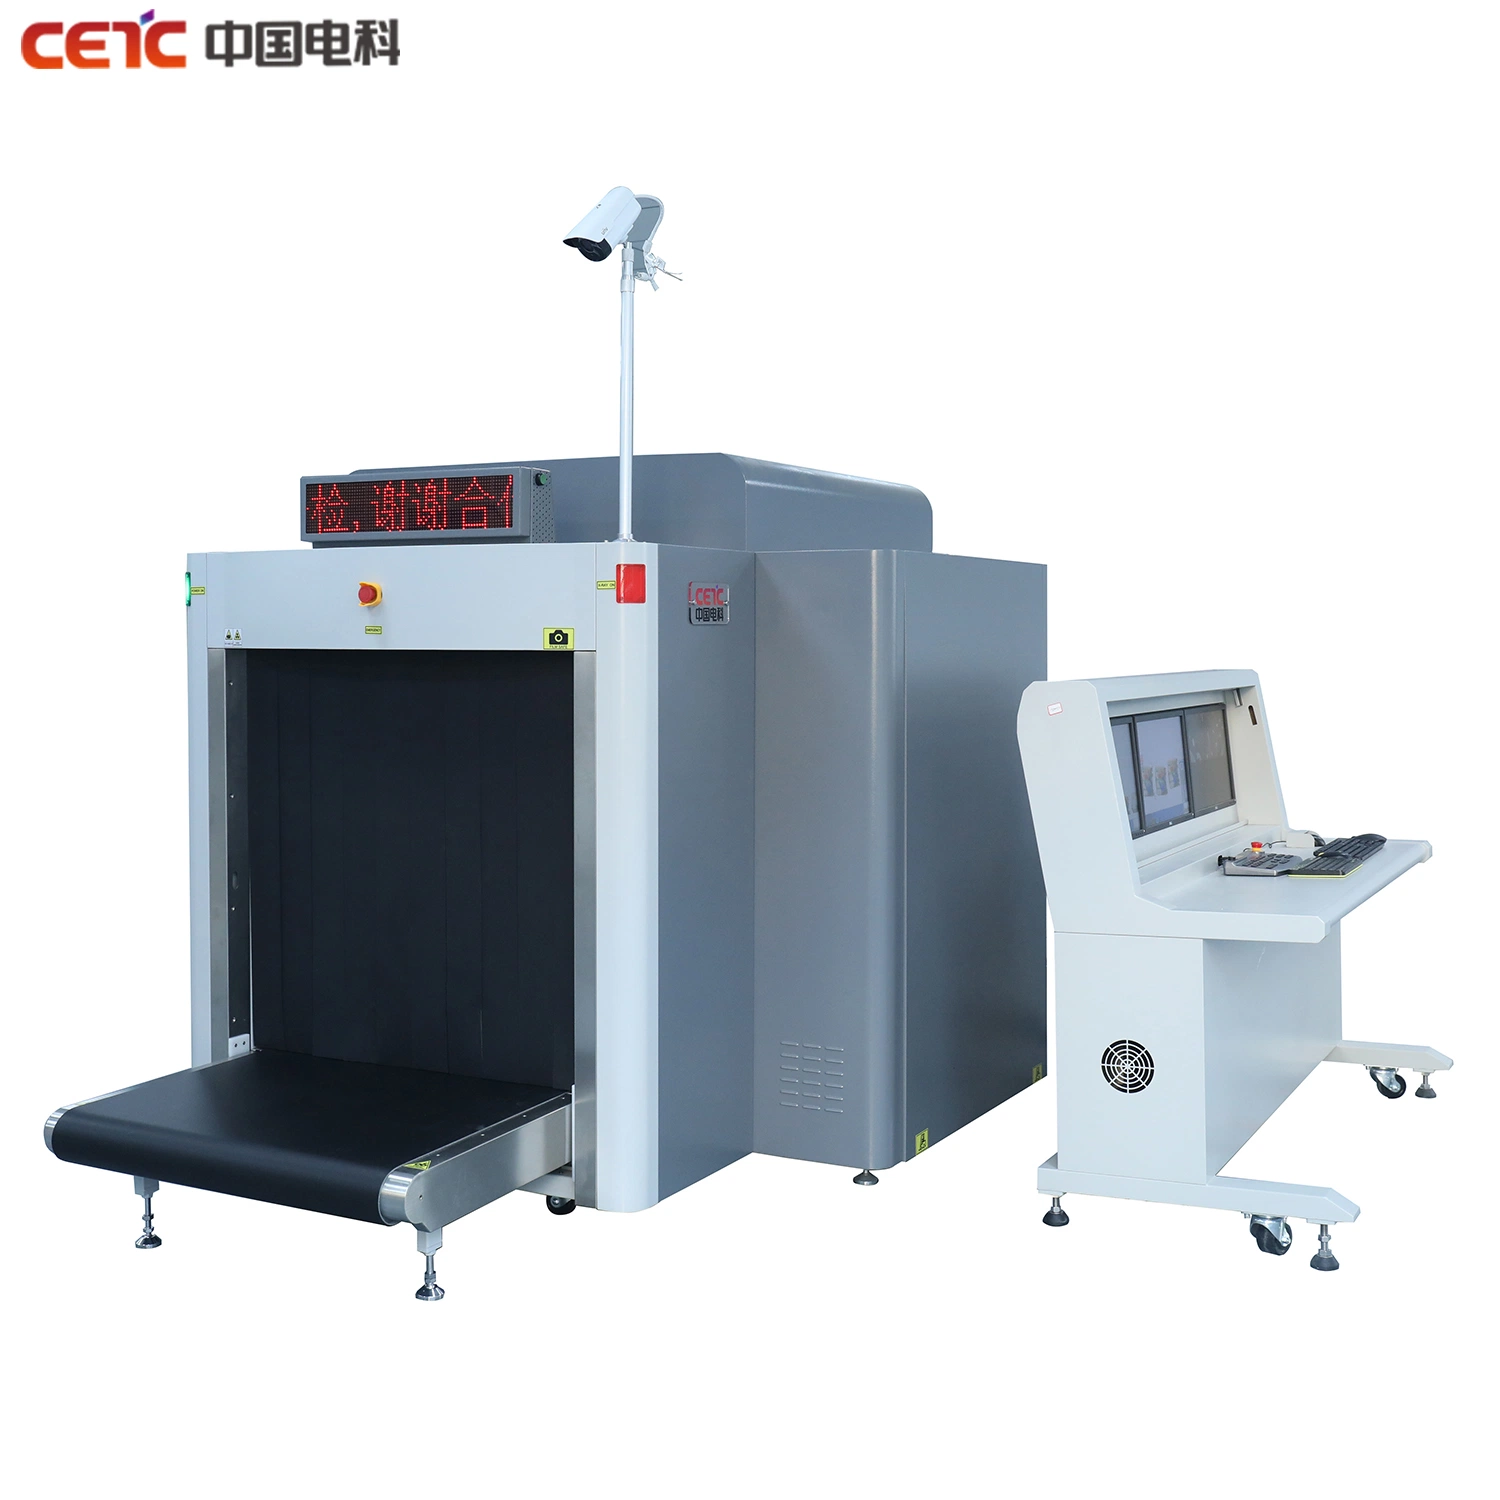 Airport Security Scanner with CE FCC FDA Approval